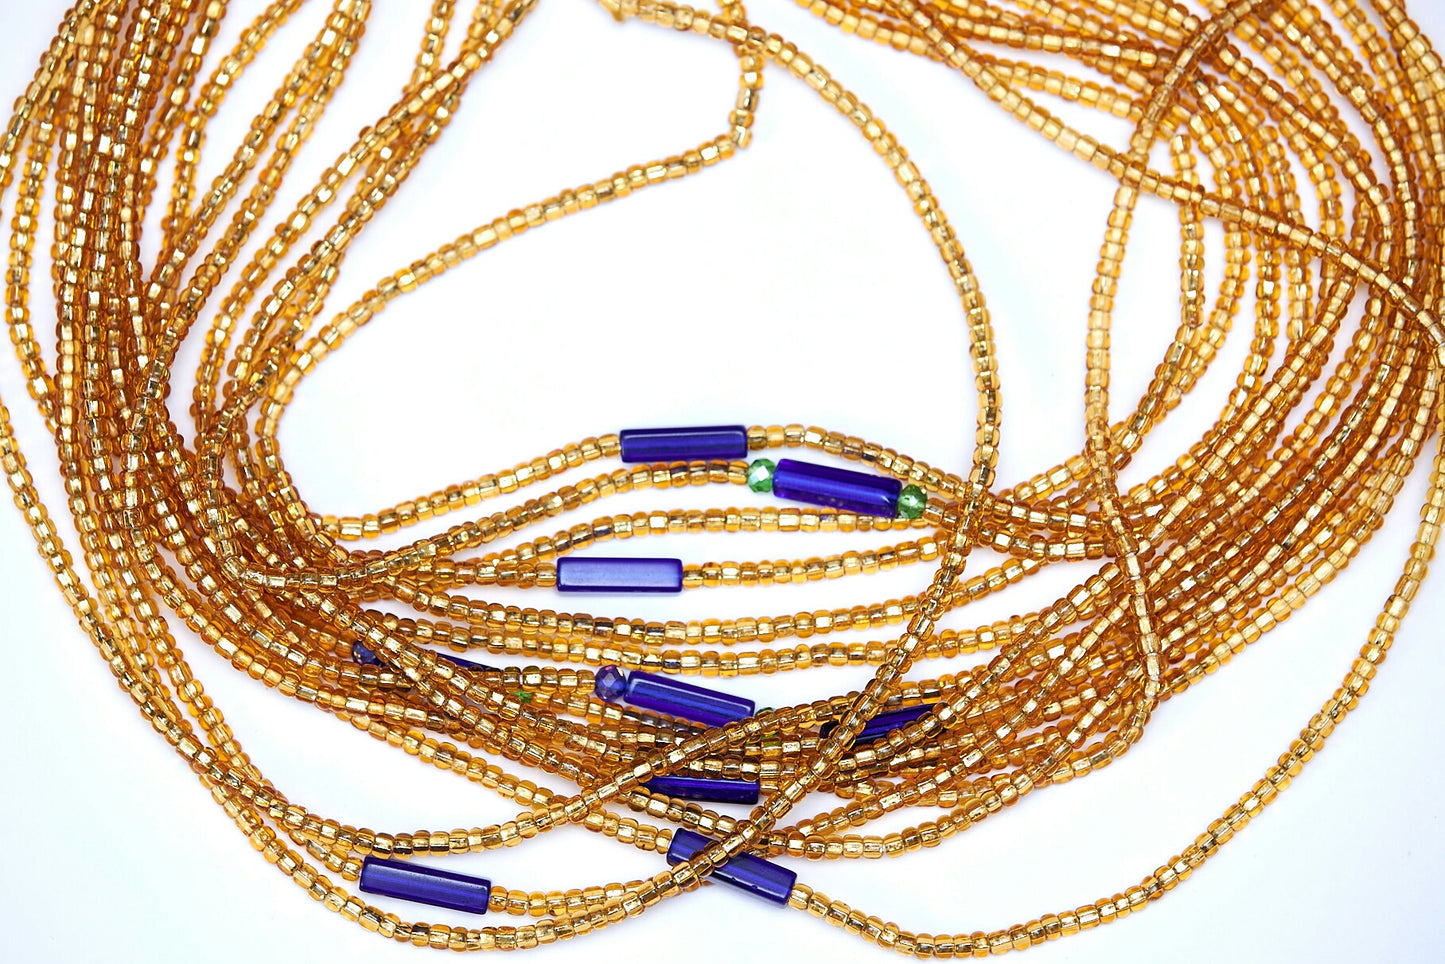 44 Inches Gold Beads With Deep Blue Pebble Bars Tie on Waist Beads 